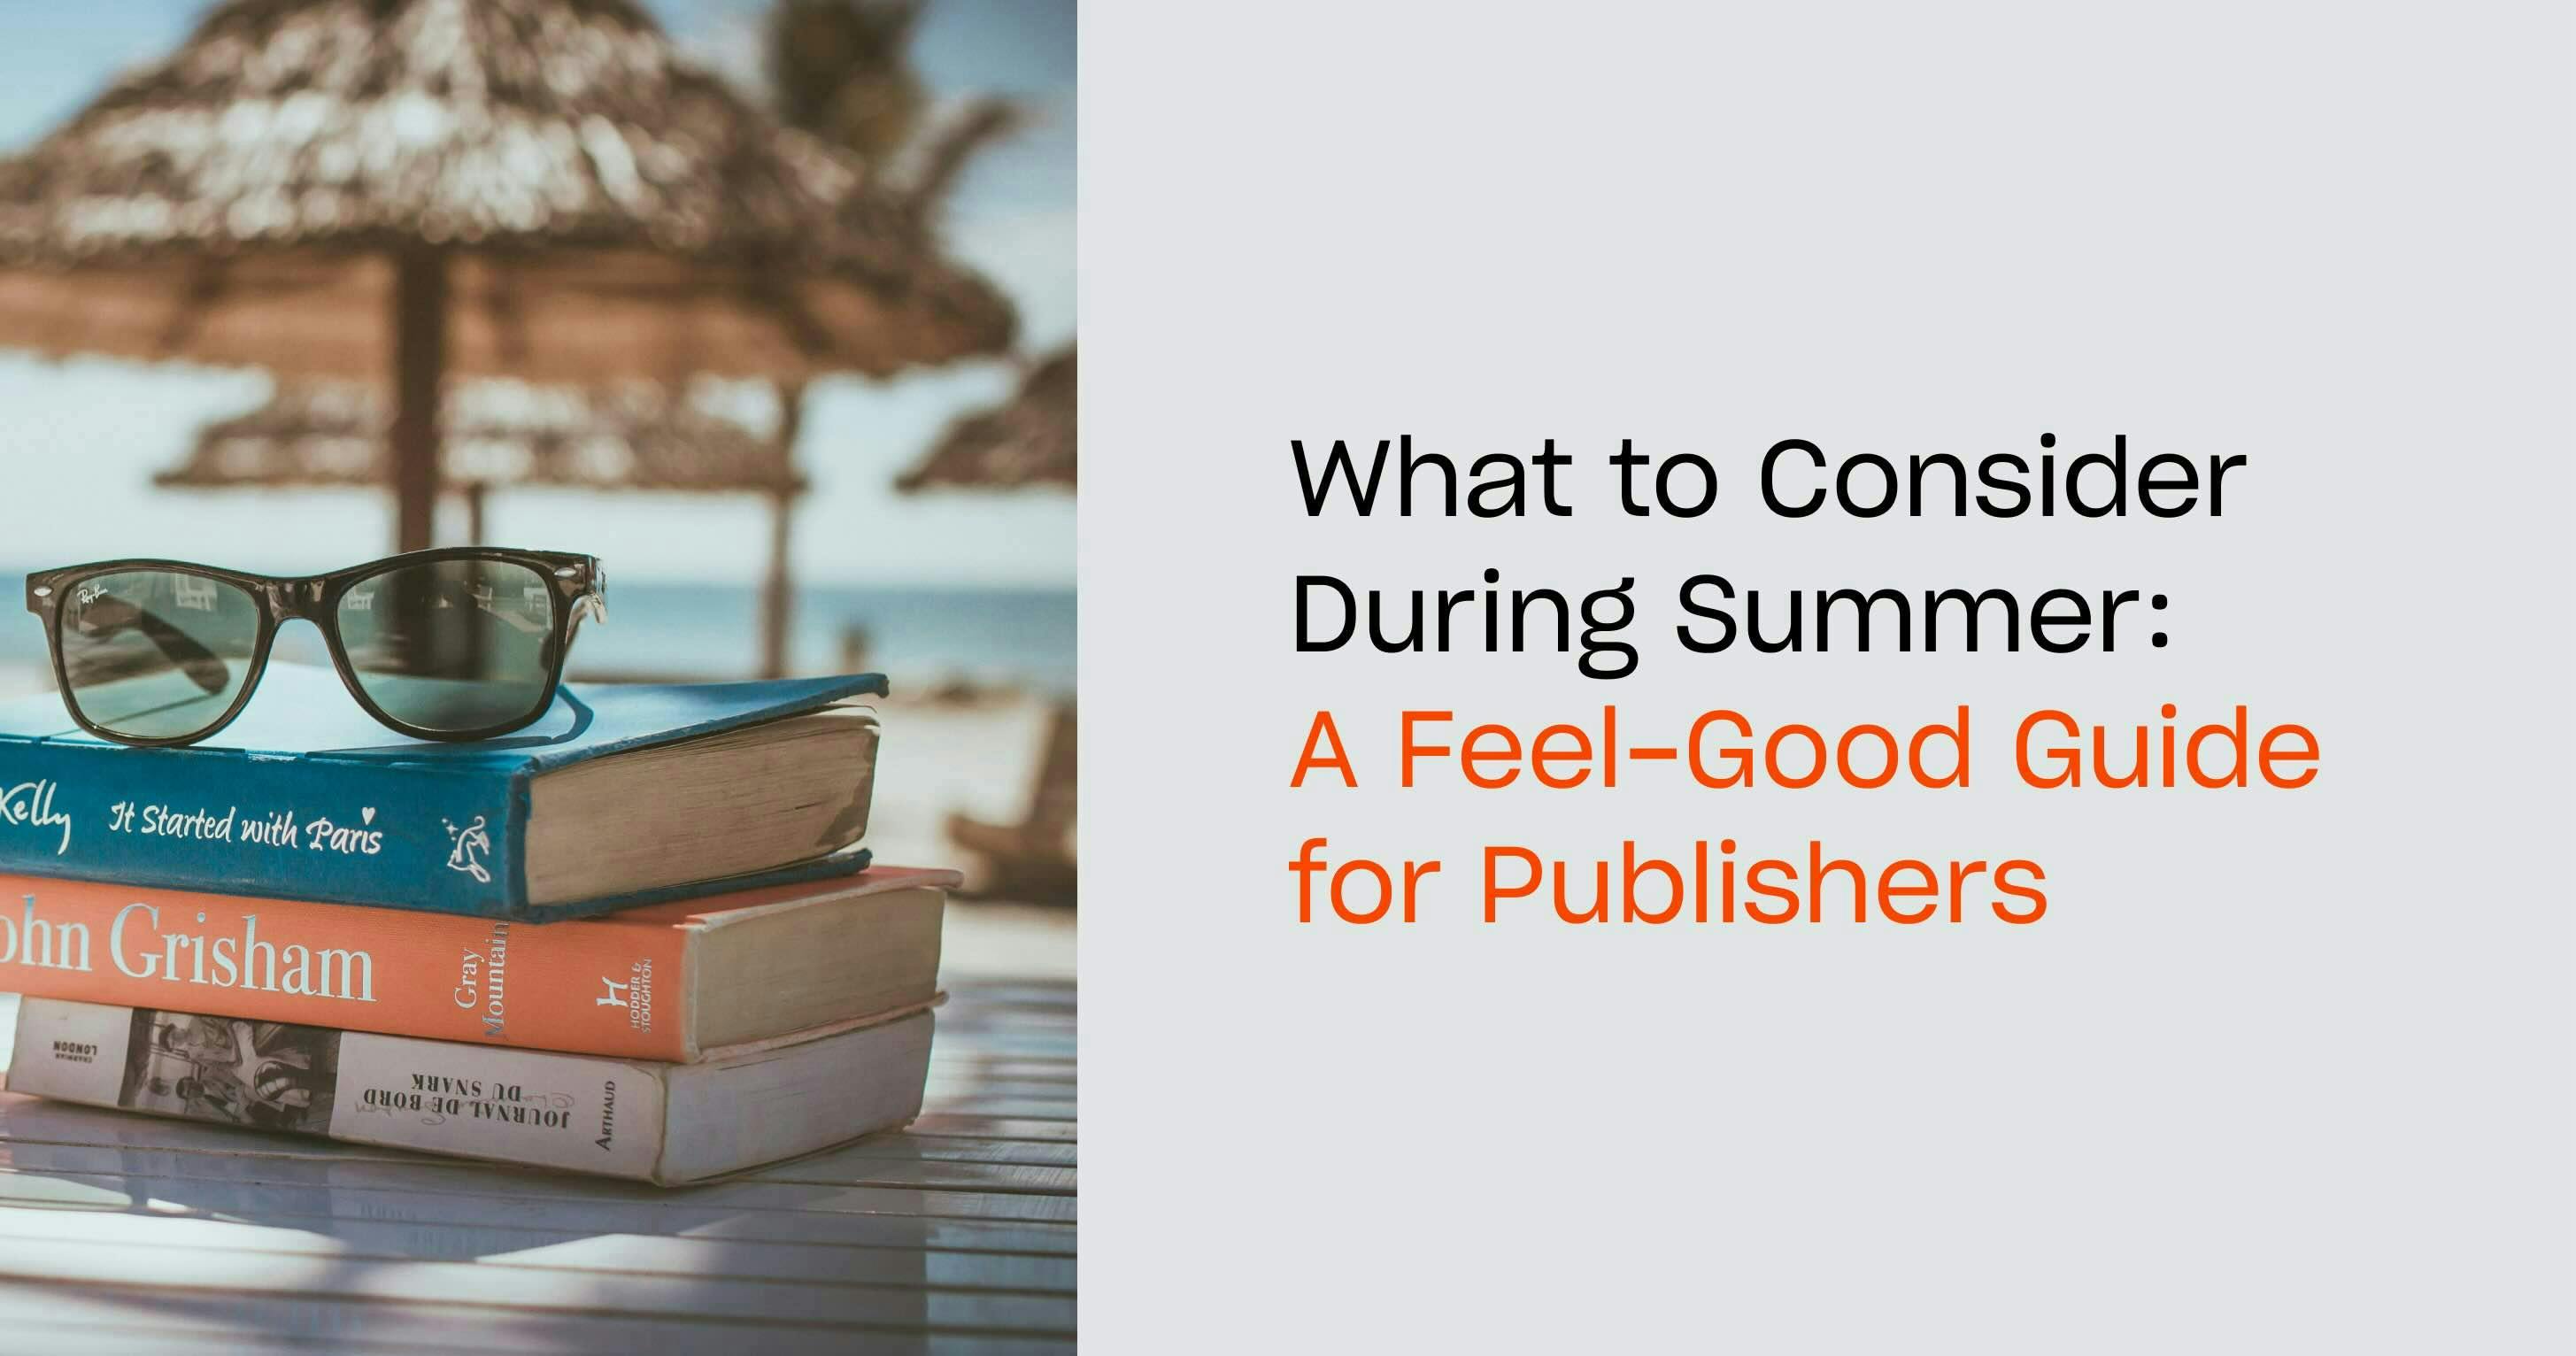 An image for a blog post titled What to Consider During Summer: A Feel-Good Guide for Publishers